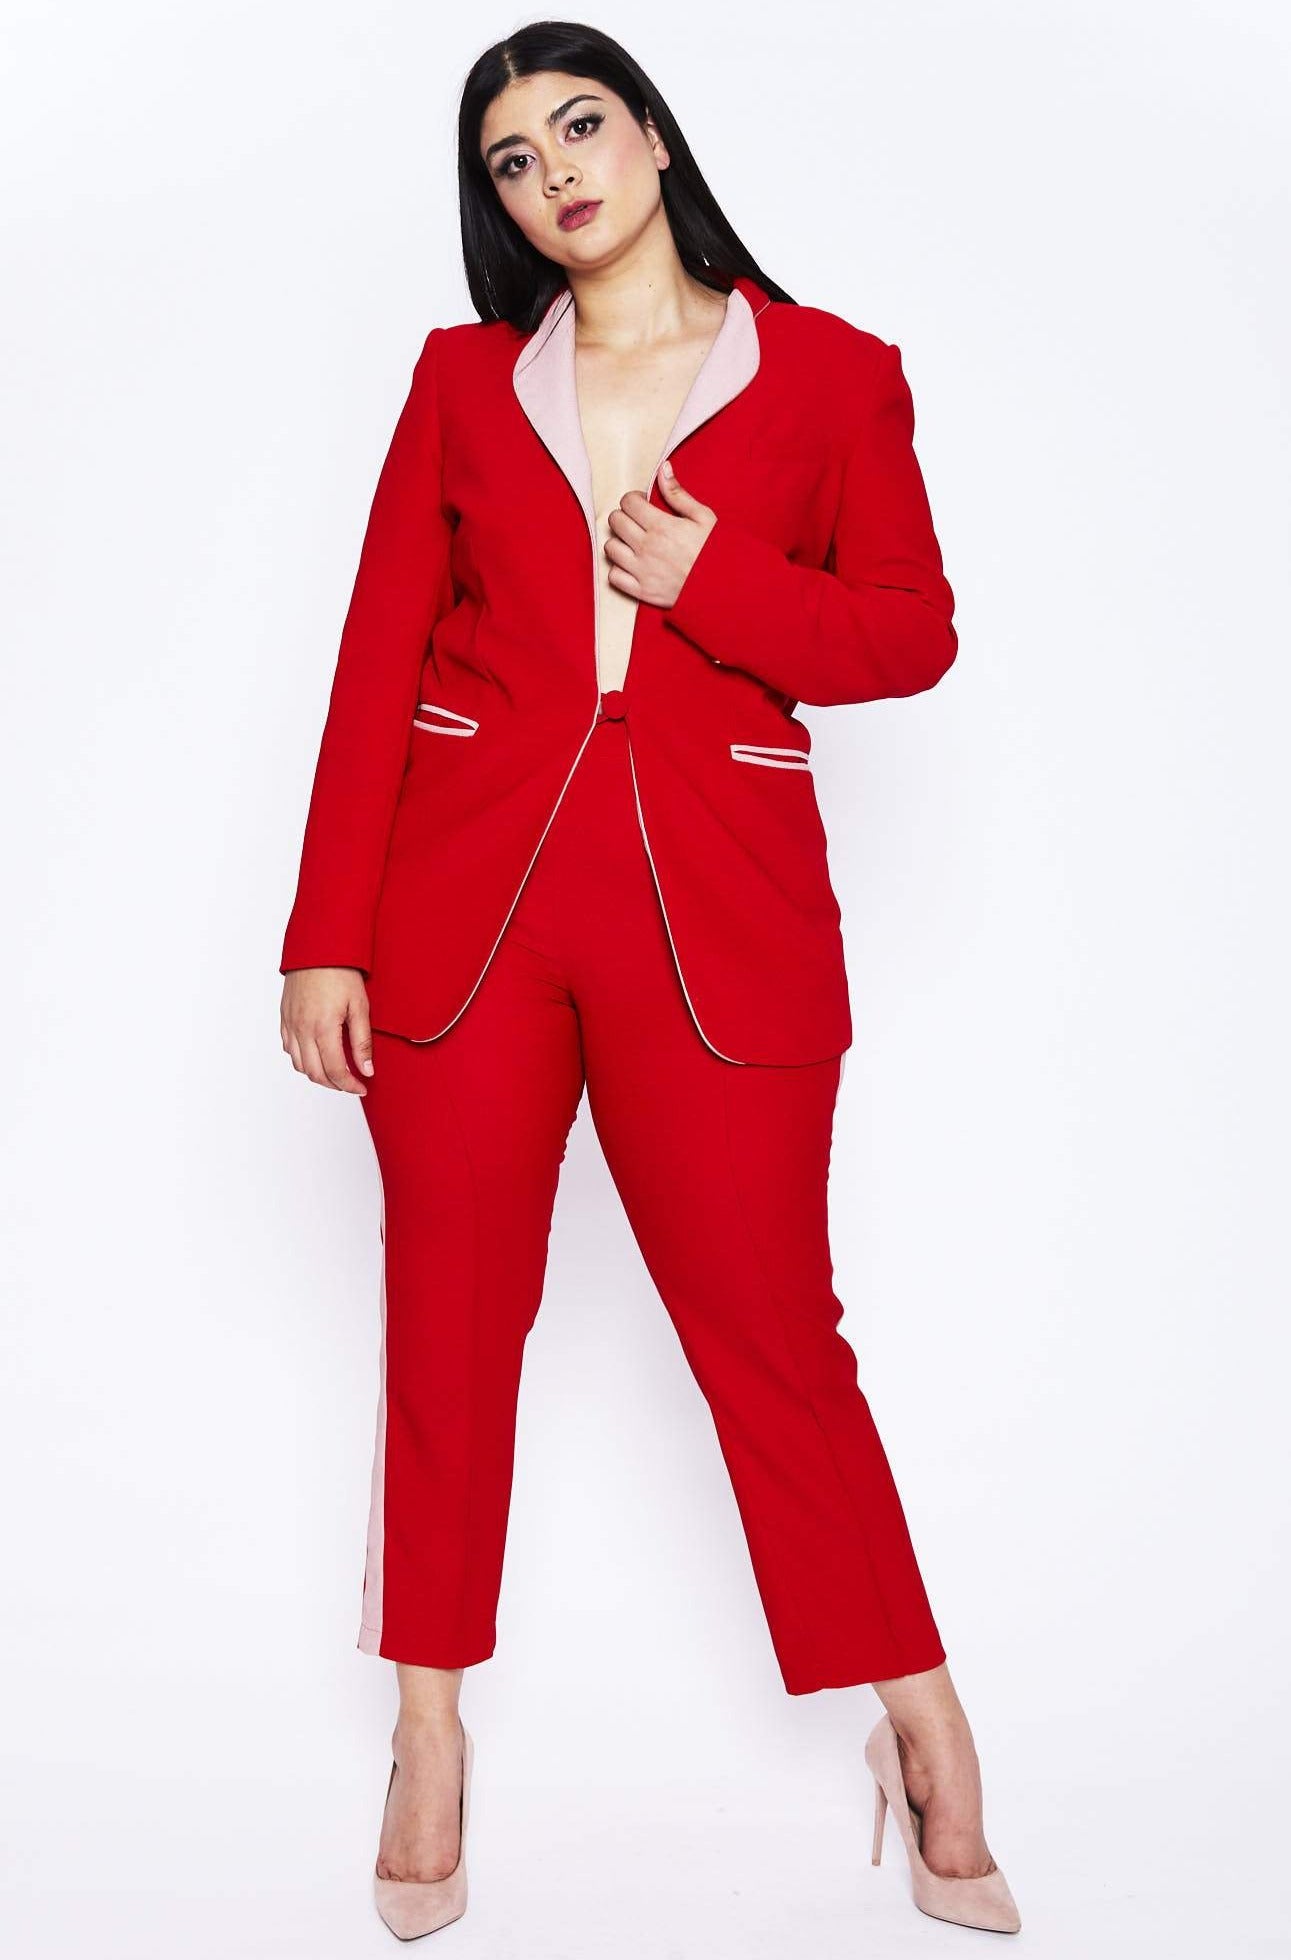 Red smoking suit by Hebe Studio